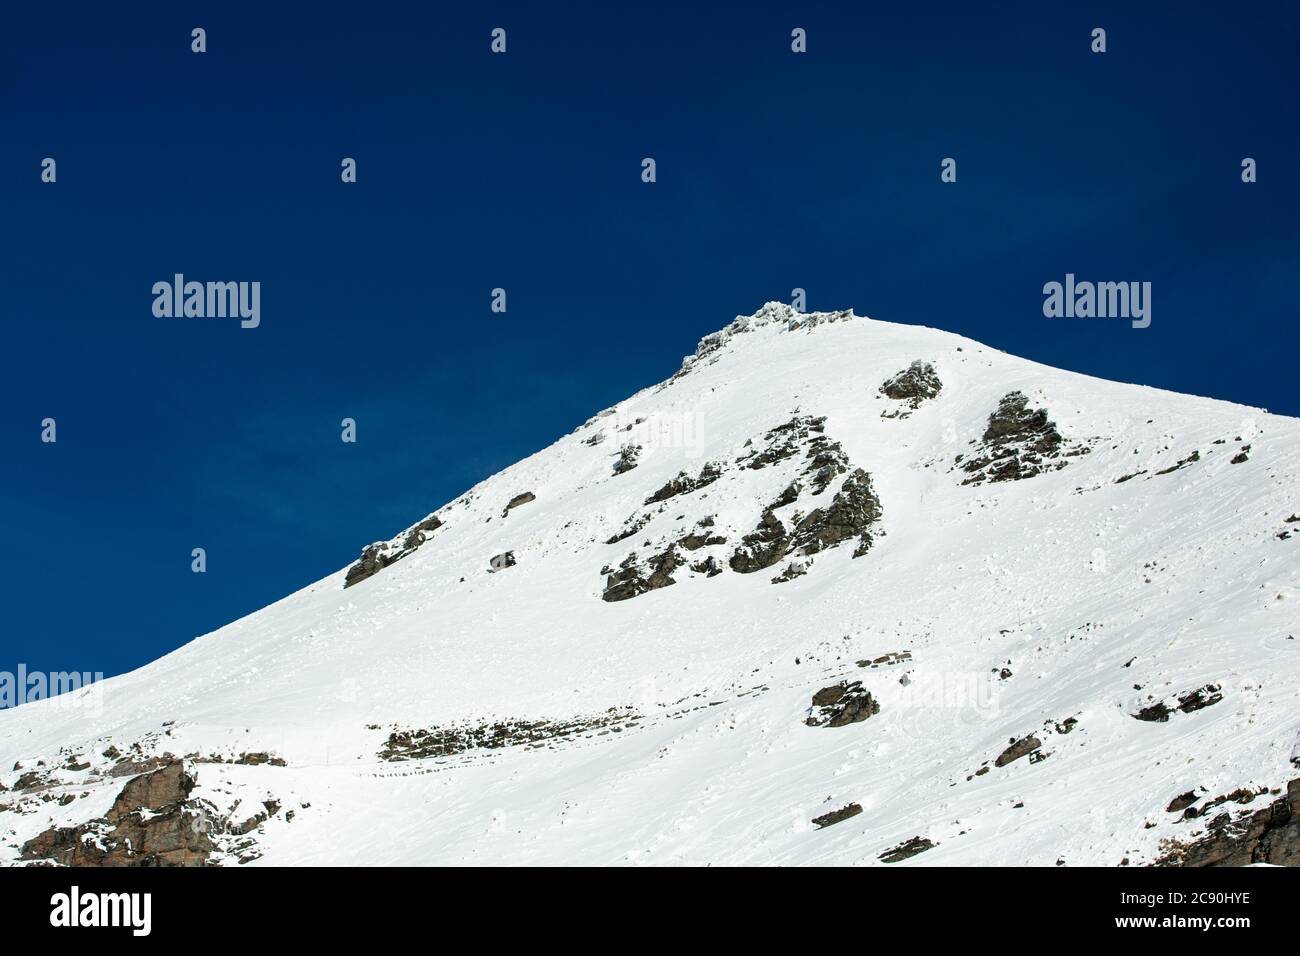 Winter landscape of snow mountain against blue sky in South island, New Zealand. Stock Photo